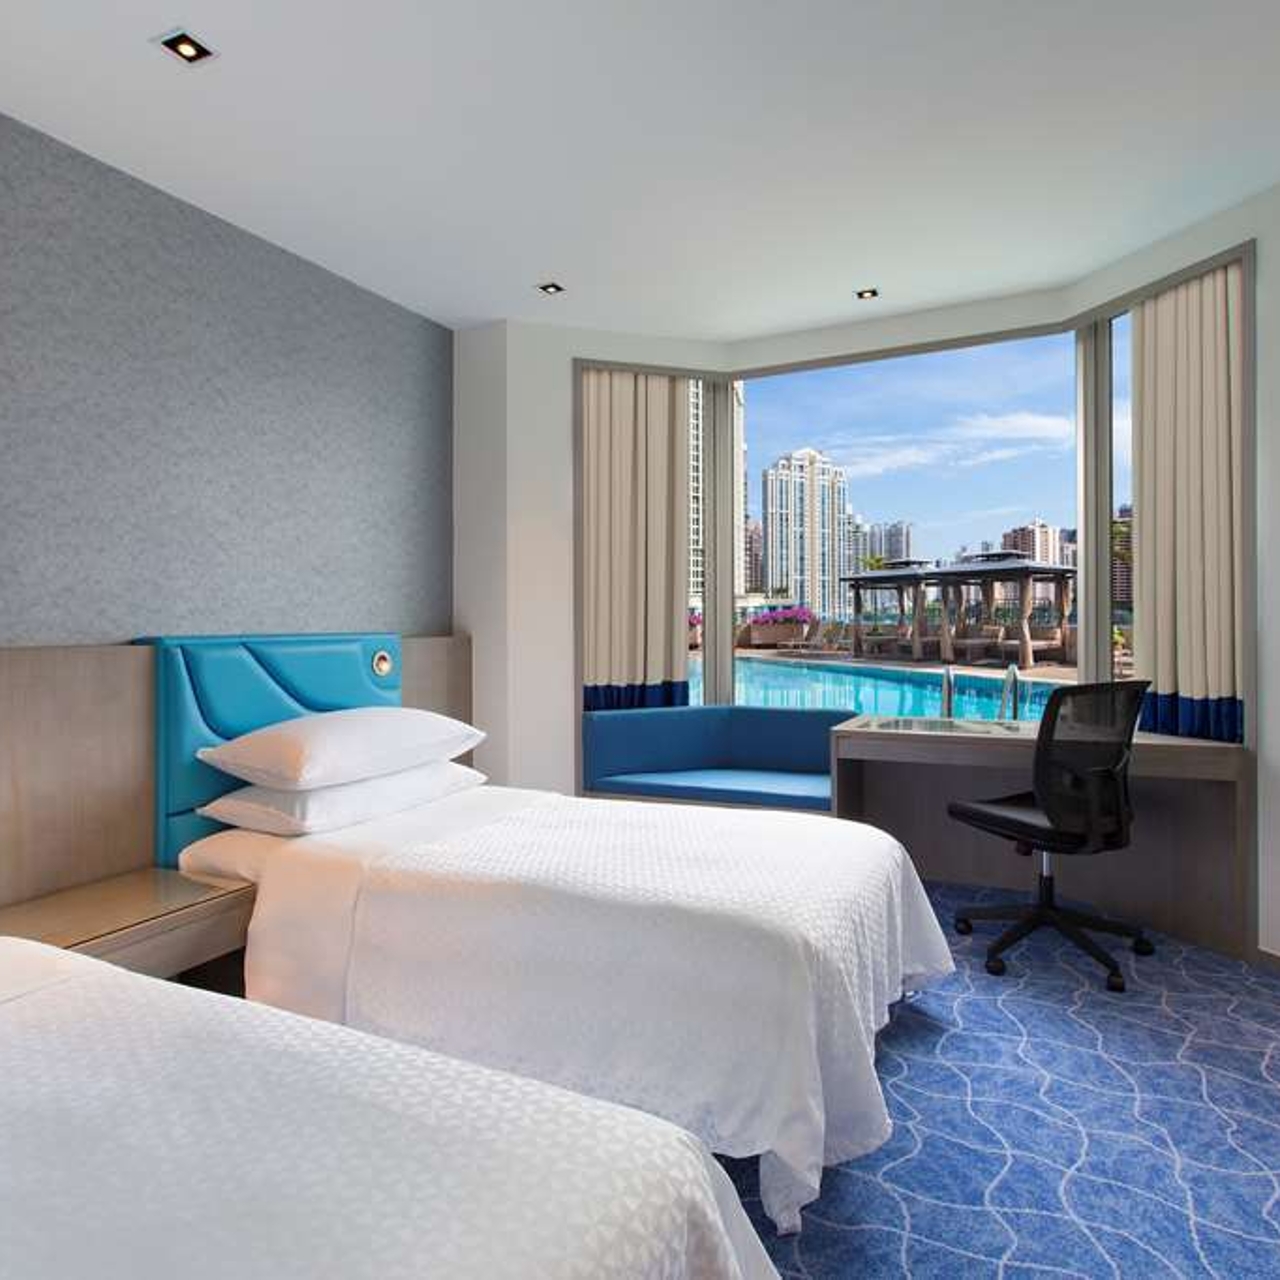 Hotel Four Points By Sheraton Singapore Riverview Singapore At Hrs With Free Services